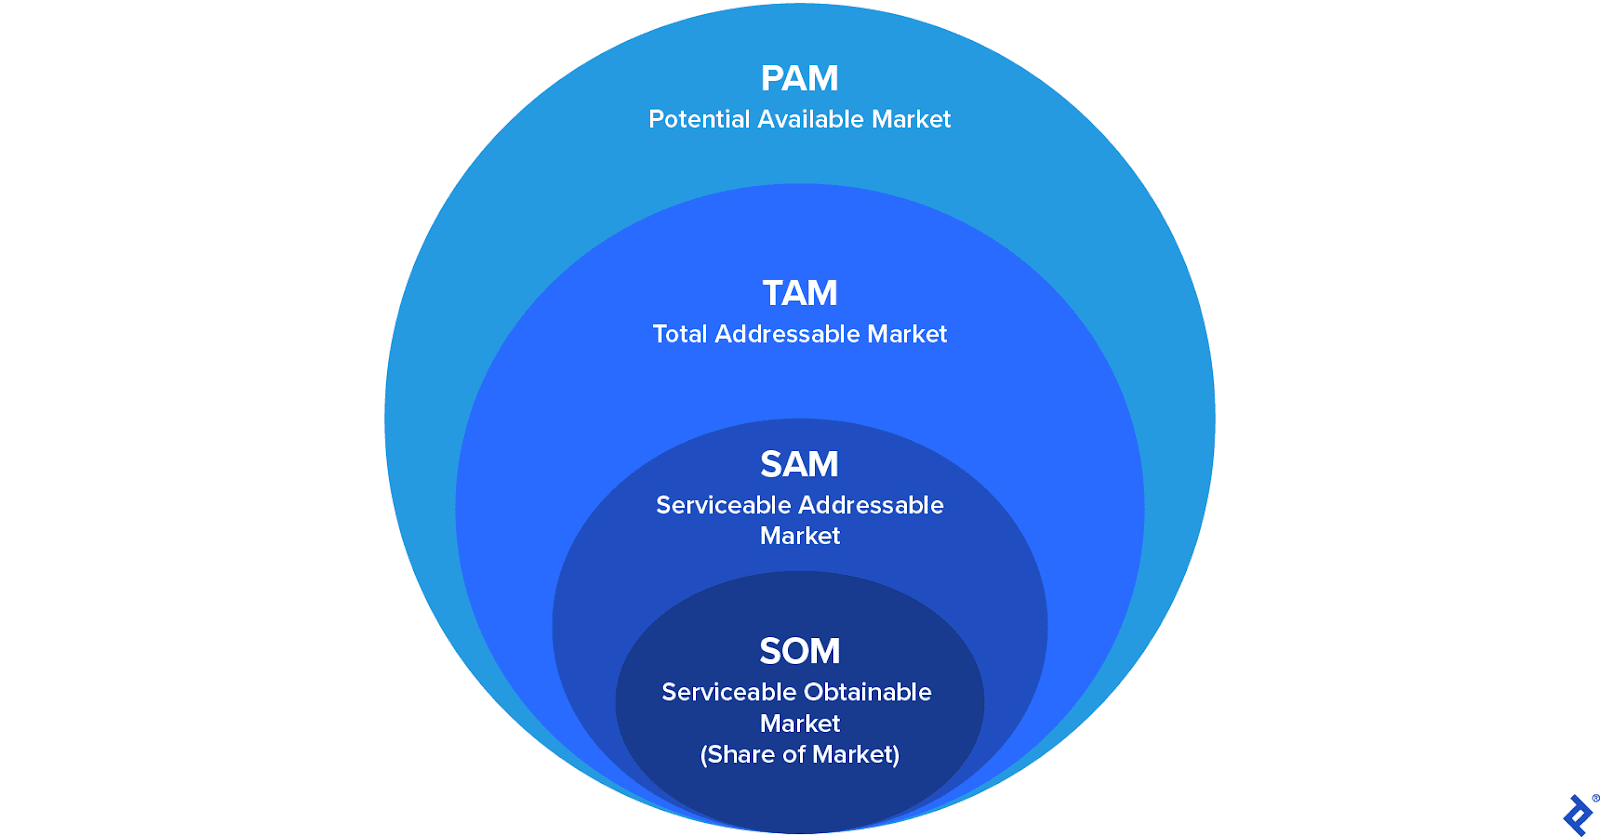 Circles of increasing size illustrate overlapping market dynamic relationships from most general to most specific: PAM, TAM, SAM, and SOM.